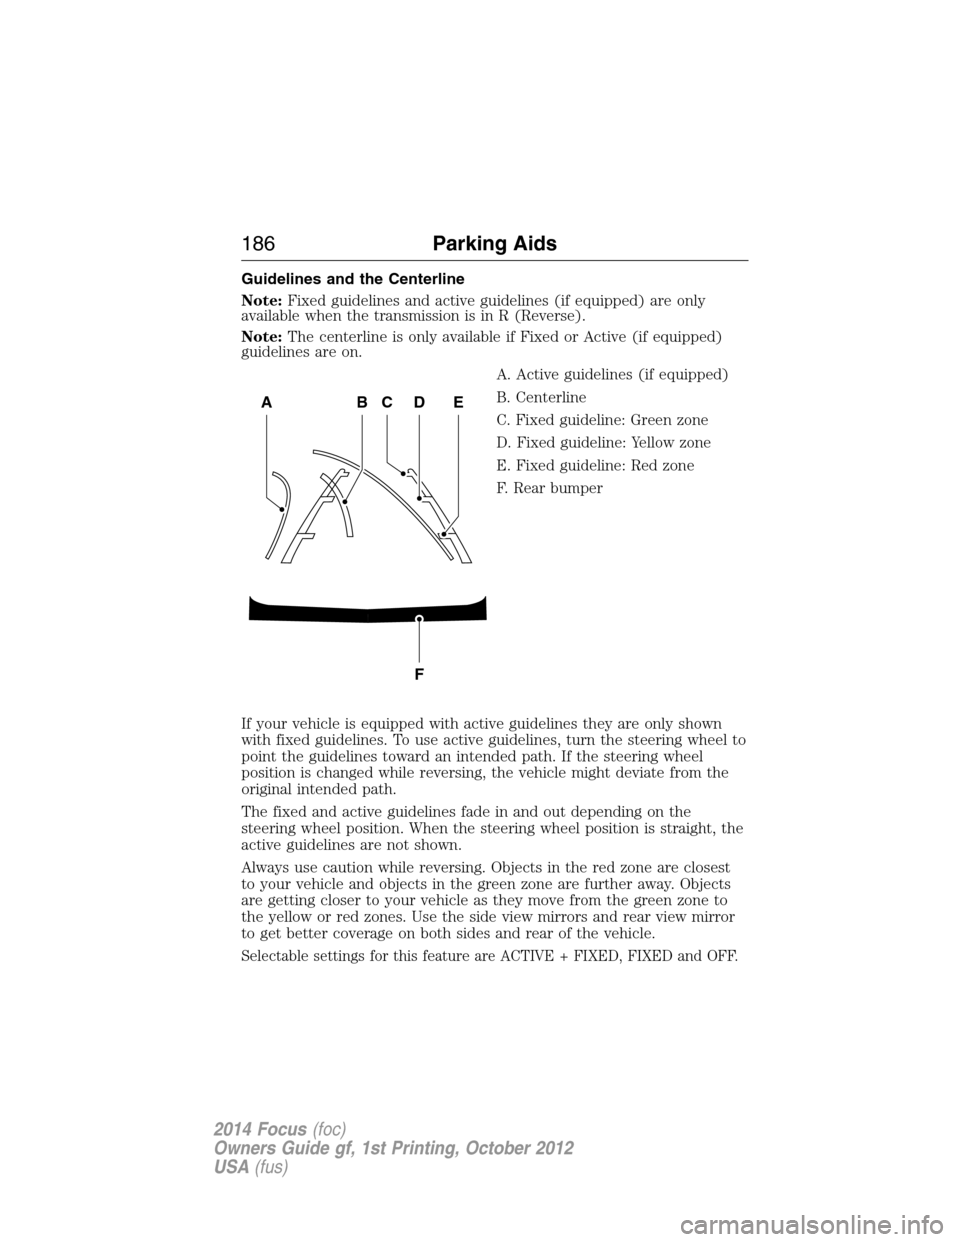 FORD FOCUS 2014 3.G User Guide Guidelines and the Centerline
Note:Fixed guidelines and active guidelines (if equipped) are only
available when the transmission is in R (Reverse).
Note:The centerline is only available if Fixed or Ac